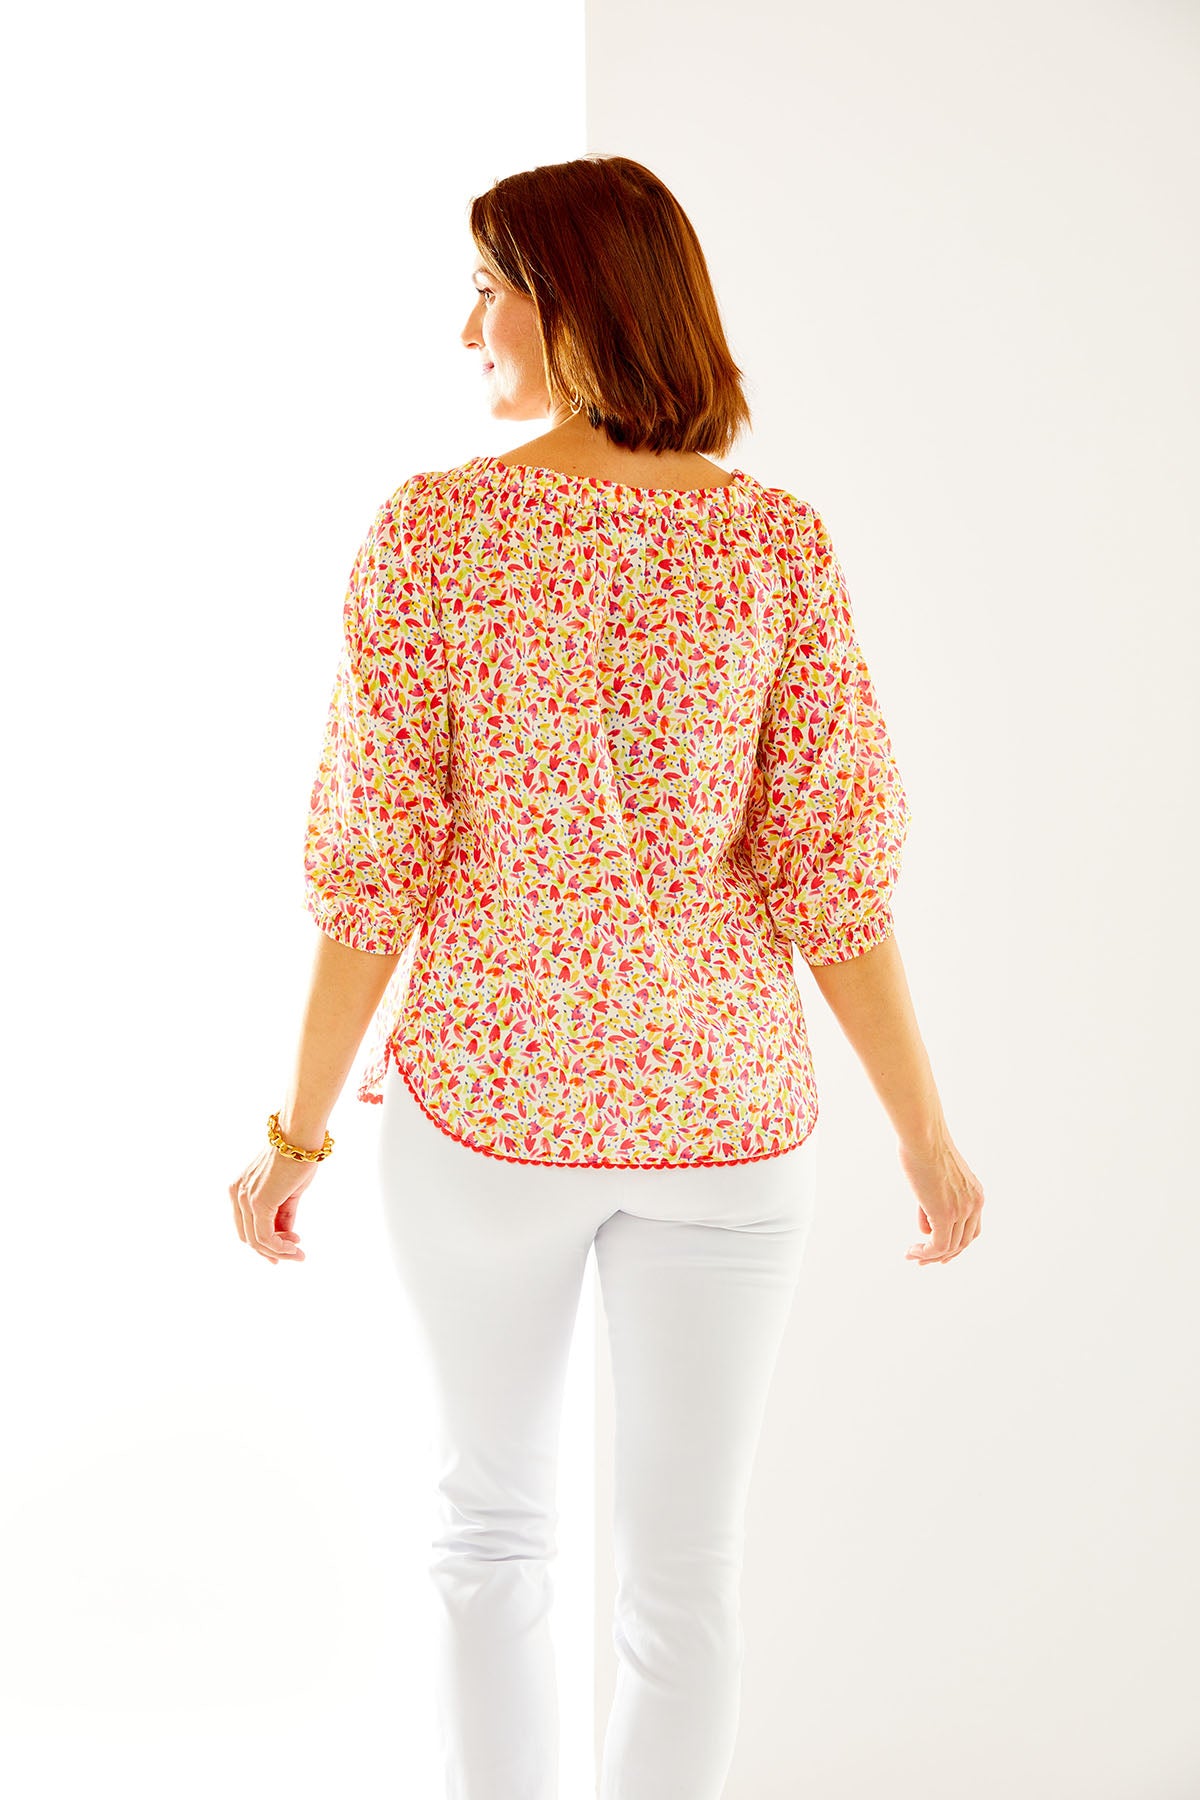 Woman in peasant sleeve blouse